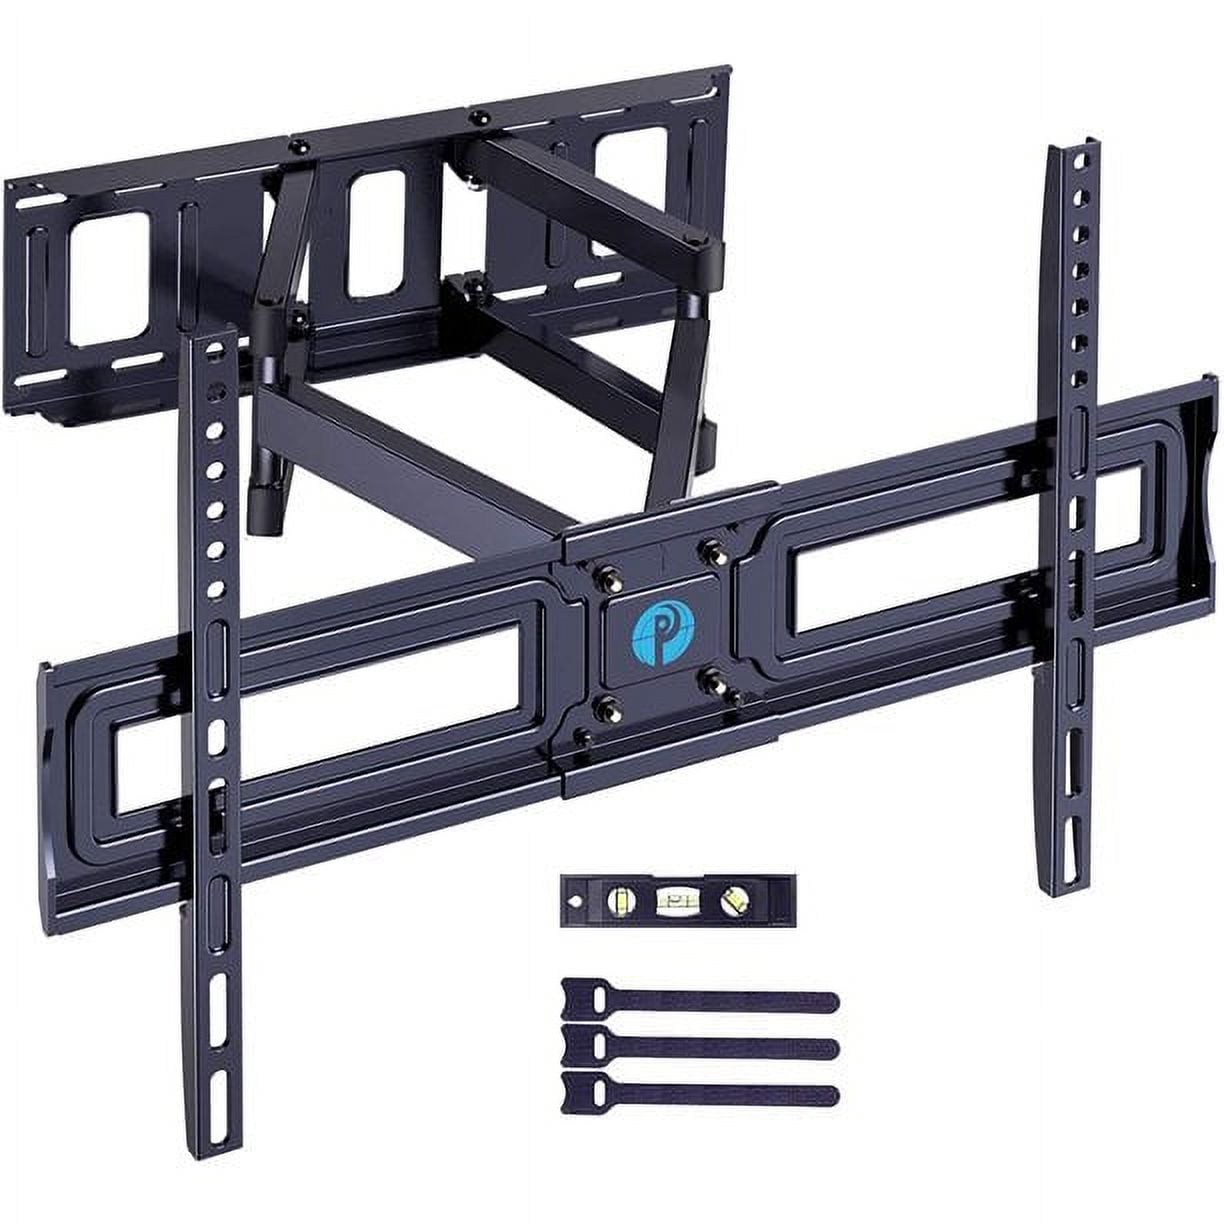 Full Motion TV Wall Mount Bracket for 37-75 Inch LCD, QLED,OLED 4K Flat Curved  TVs, Max 600x400mm,hold up to 132lbs